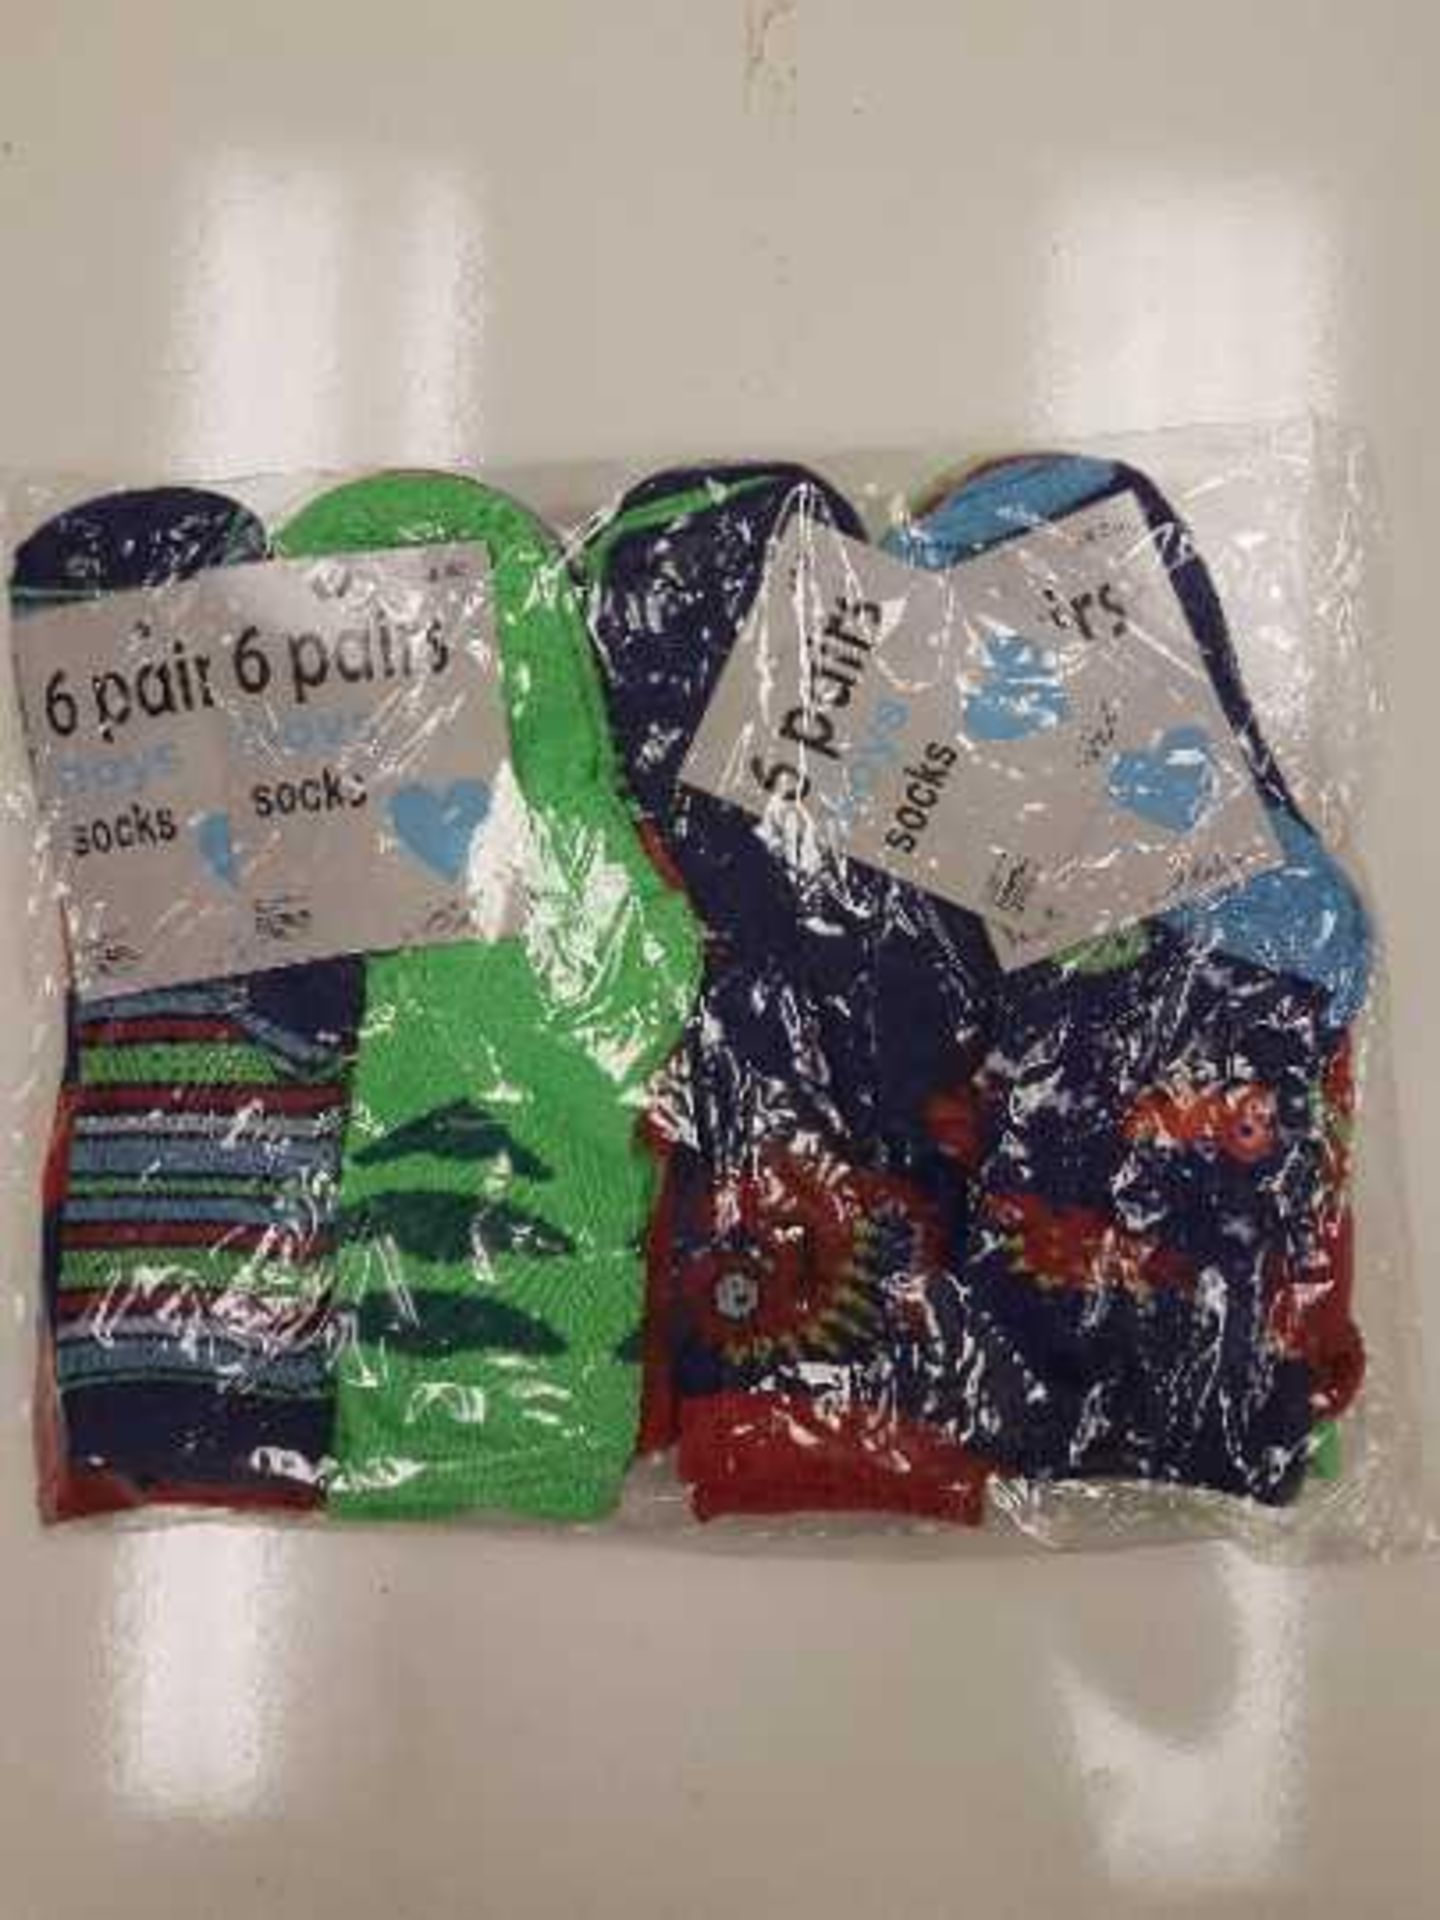 4 Packs Of BHS Childrens Socks (each pack Contains 3 Pairs). New in Packaging